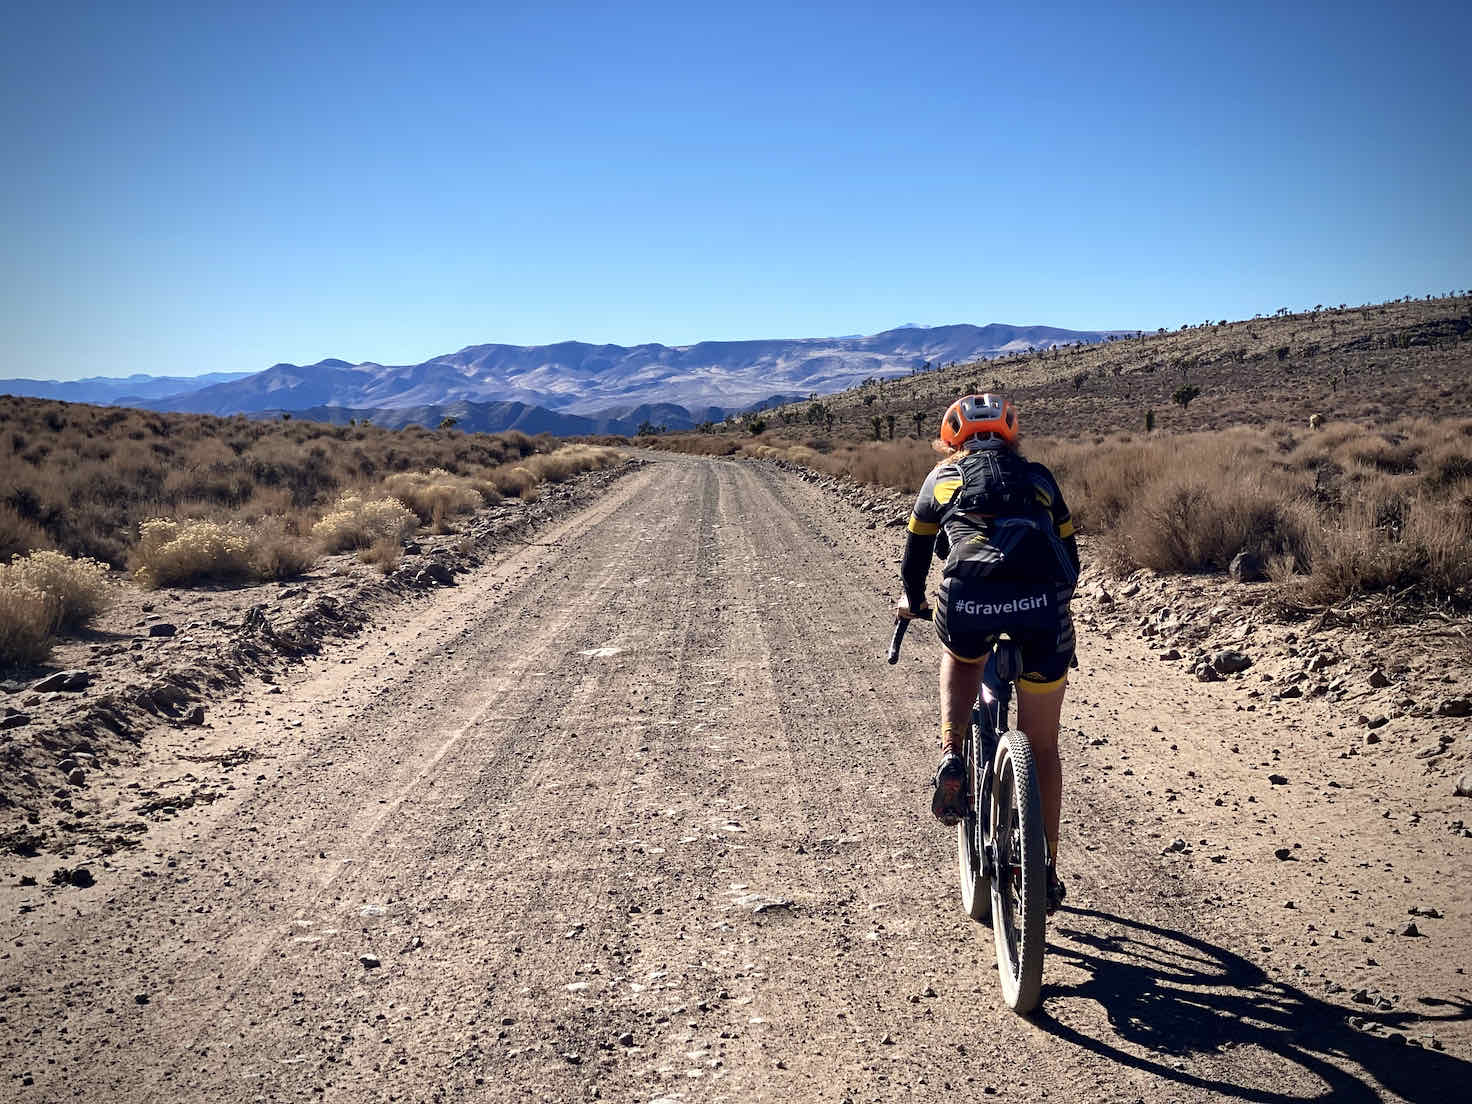 Woman gravel cyclist descending back into Lee's Flat and the Joshua Trees.